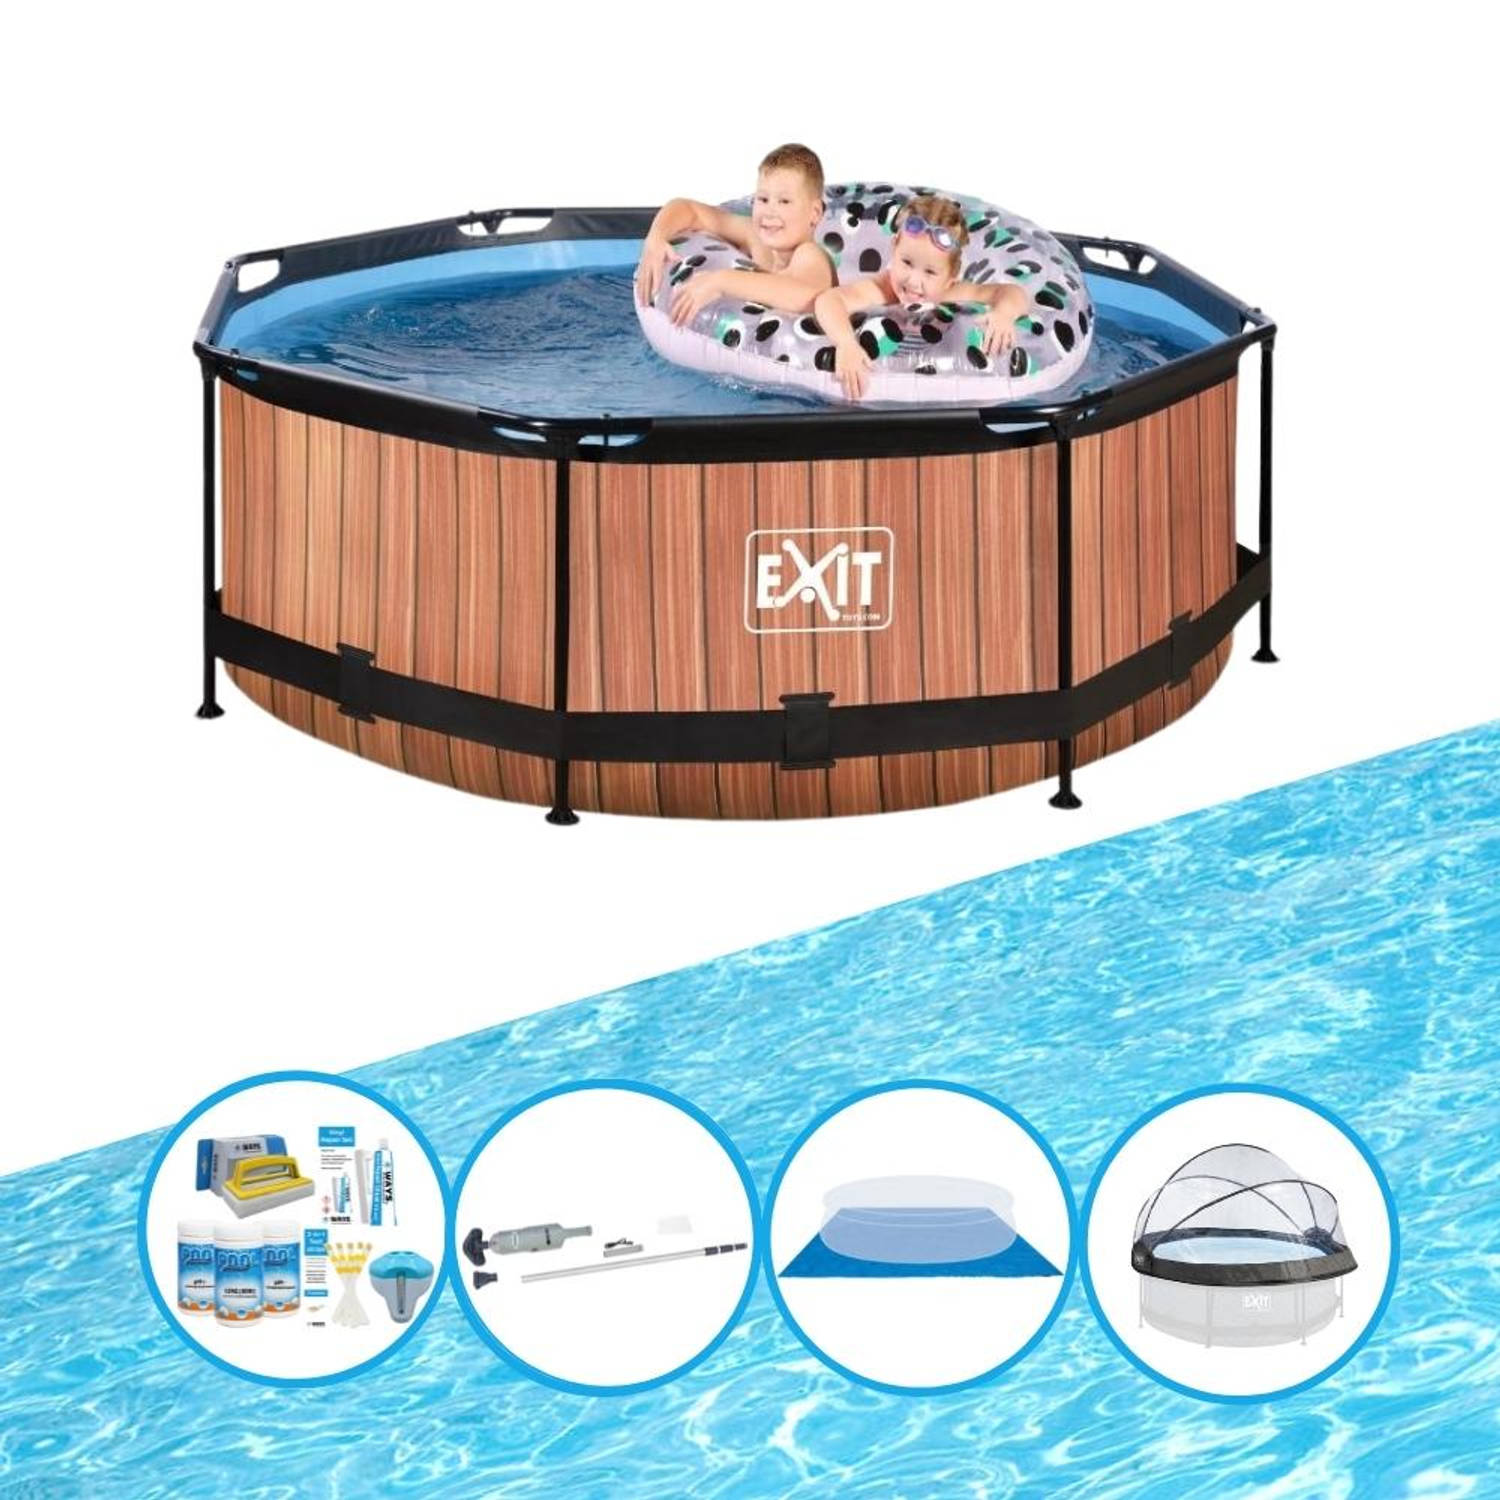 EXIT Toys Exit Zwembad Timber Style - ø244x76 Cm - Frame Pool - Complete Zwembadset - Bruin